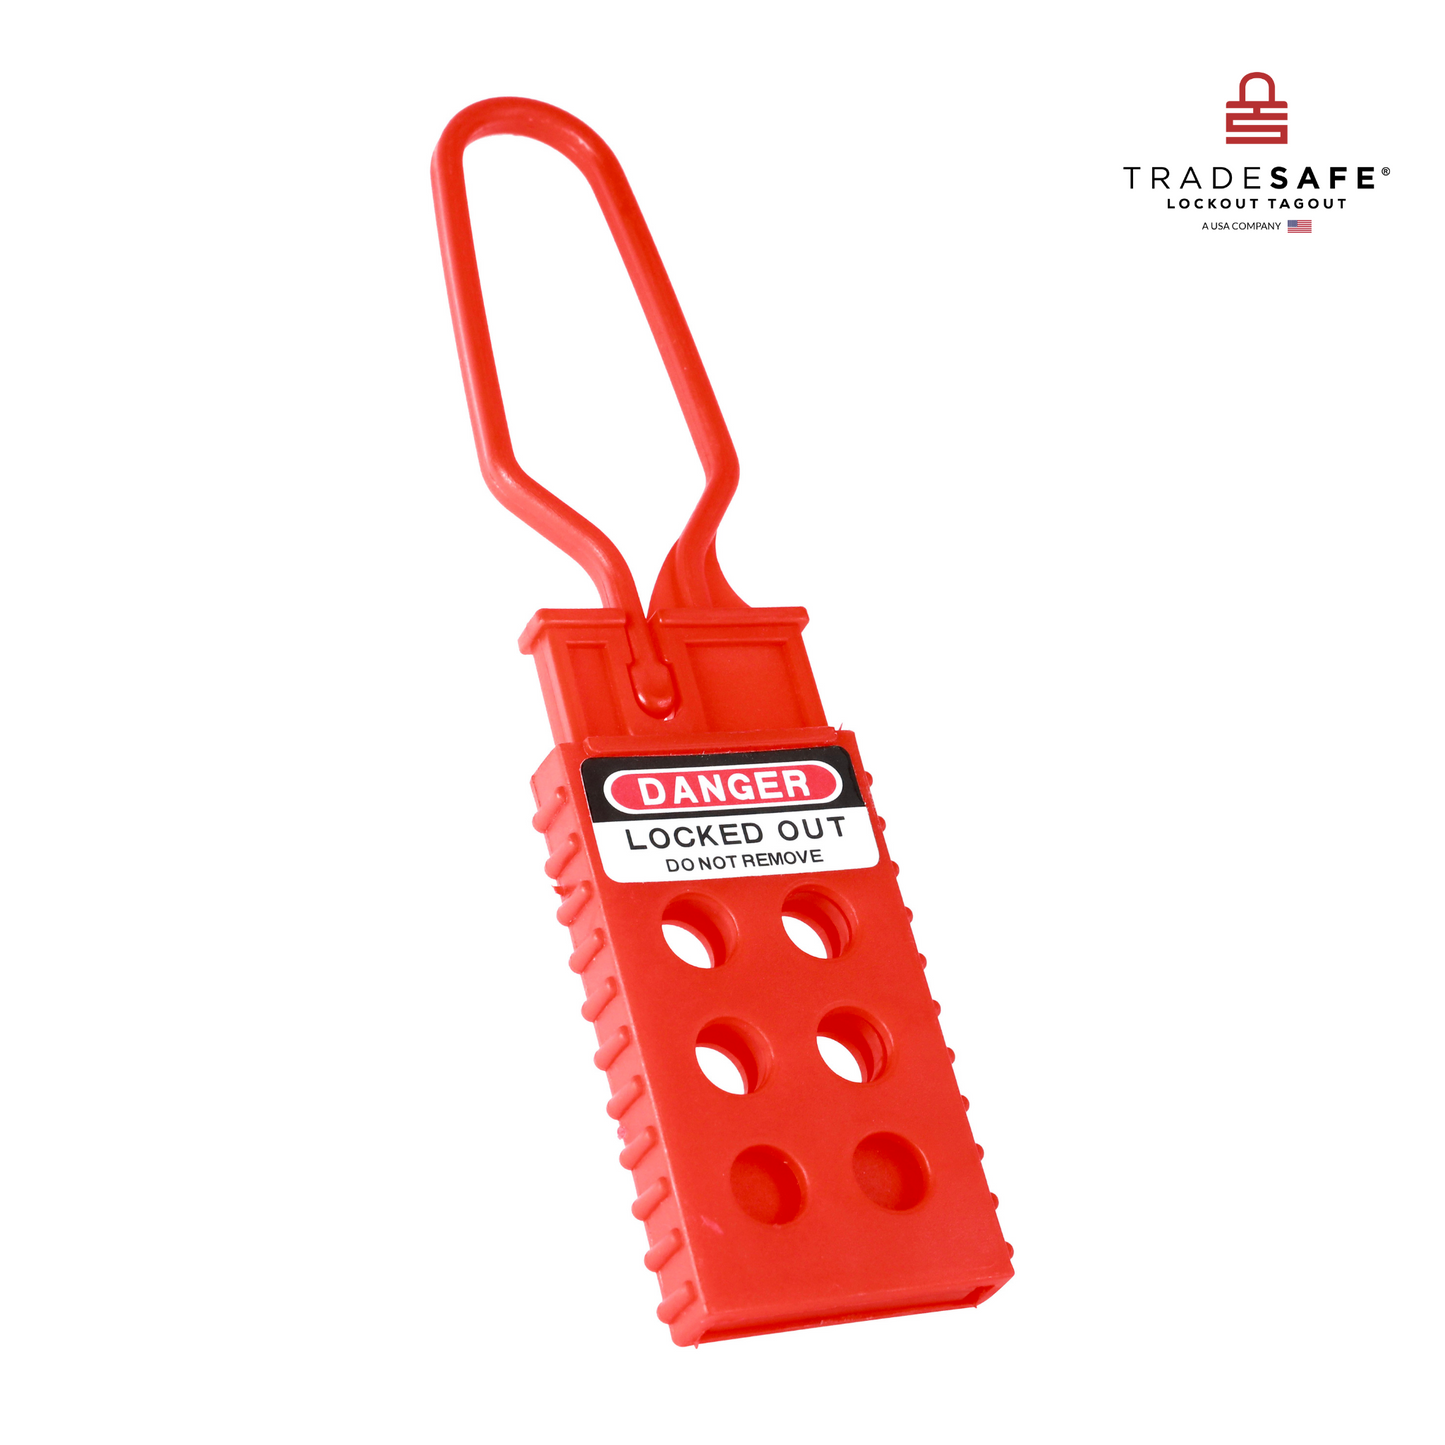 eye-level front view of plastic lockout tagout hasp with label "danger,locked out, do not remove"